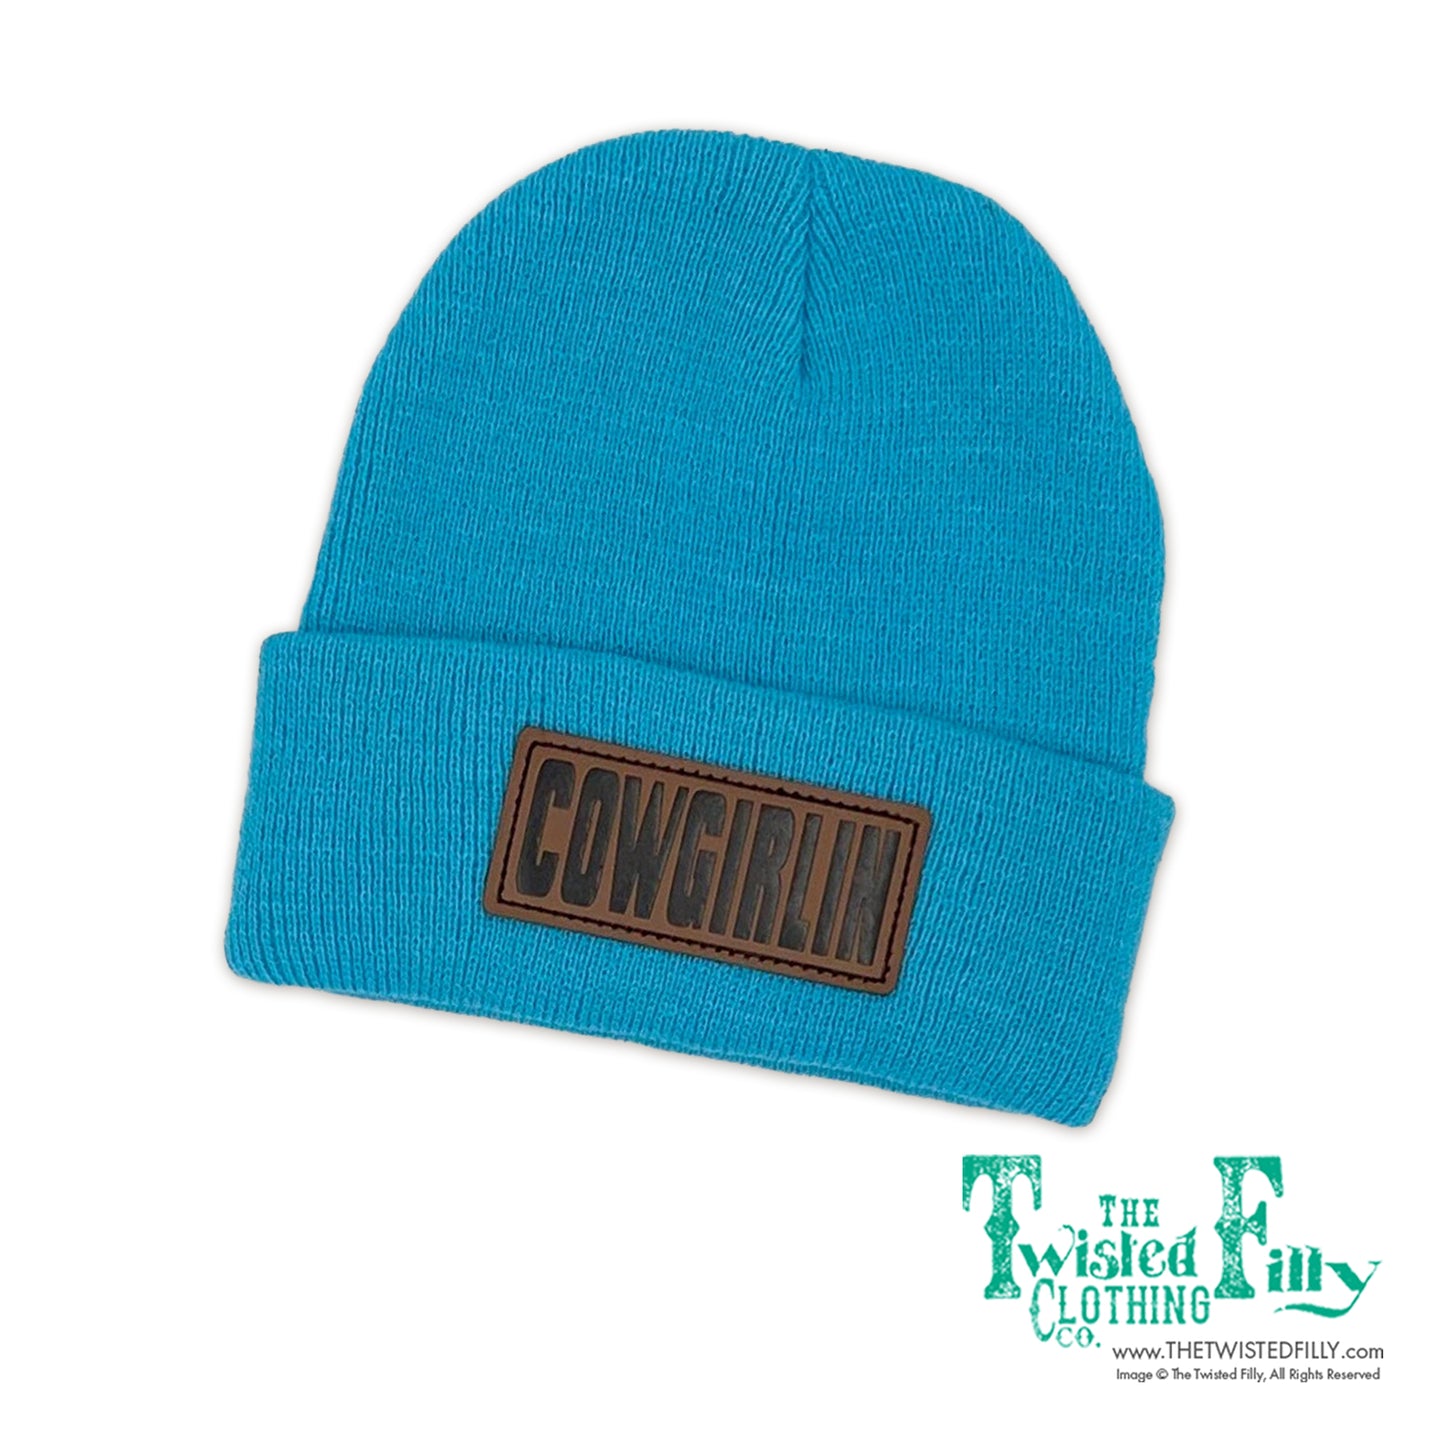 Cowgirlin' Leather Patch Beanie - Turquoise